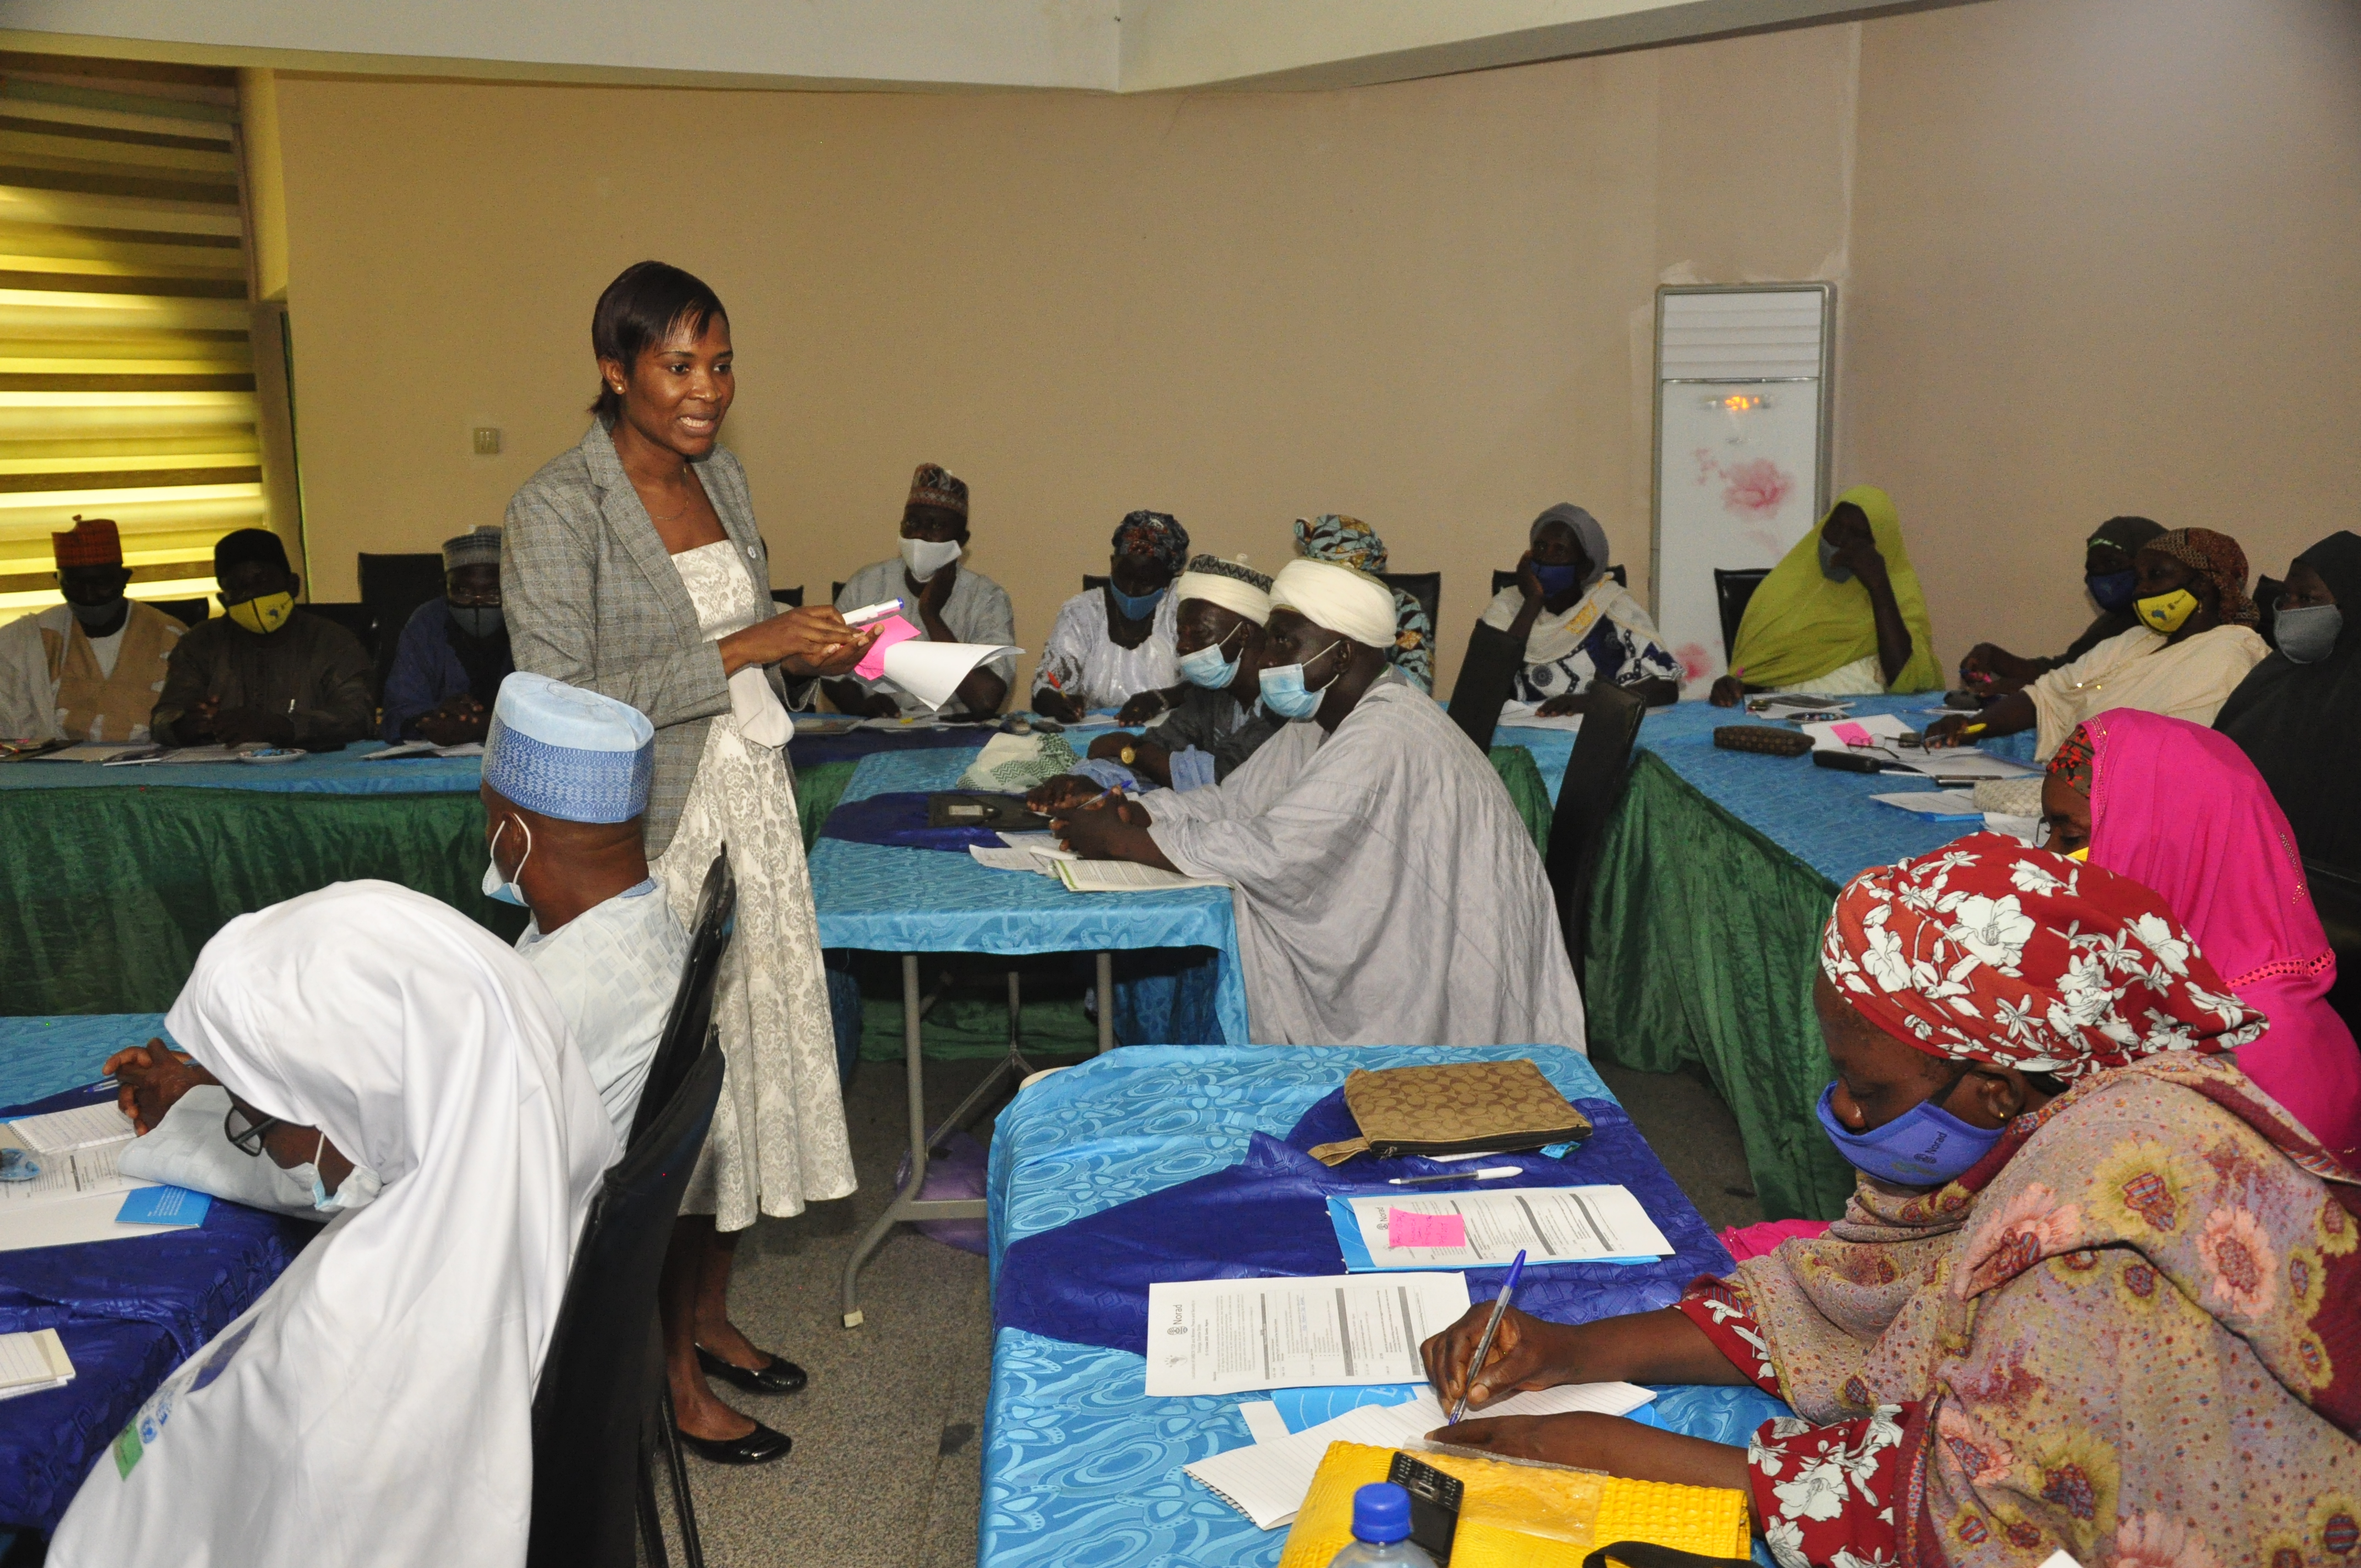 Workshop  with  Civil Society on Localization of UNSCR 1325  in Balanga Local Government, Gombe State, Nigeria. Photo courtesy of Patience Ikpe Obaulo